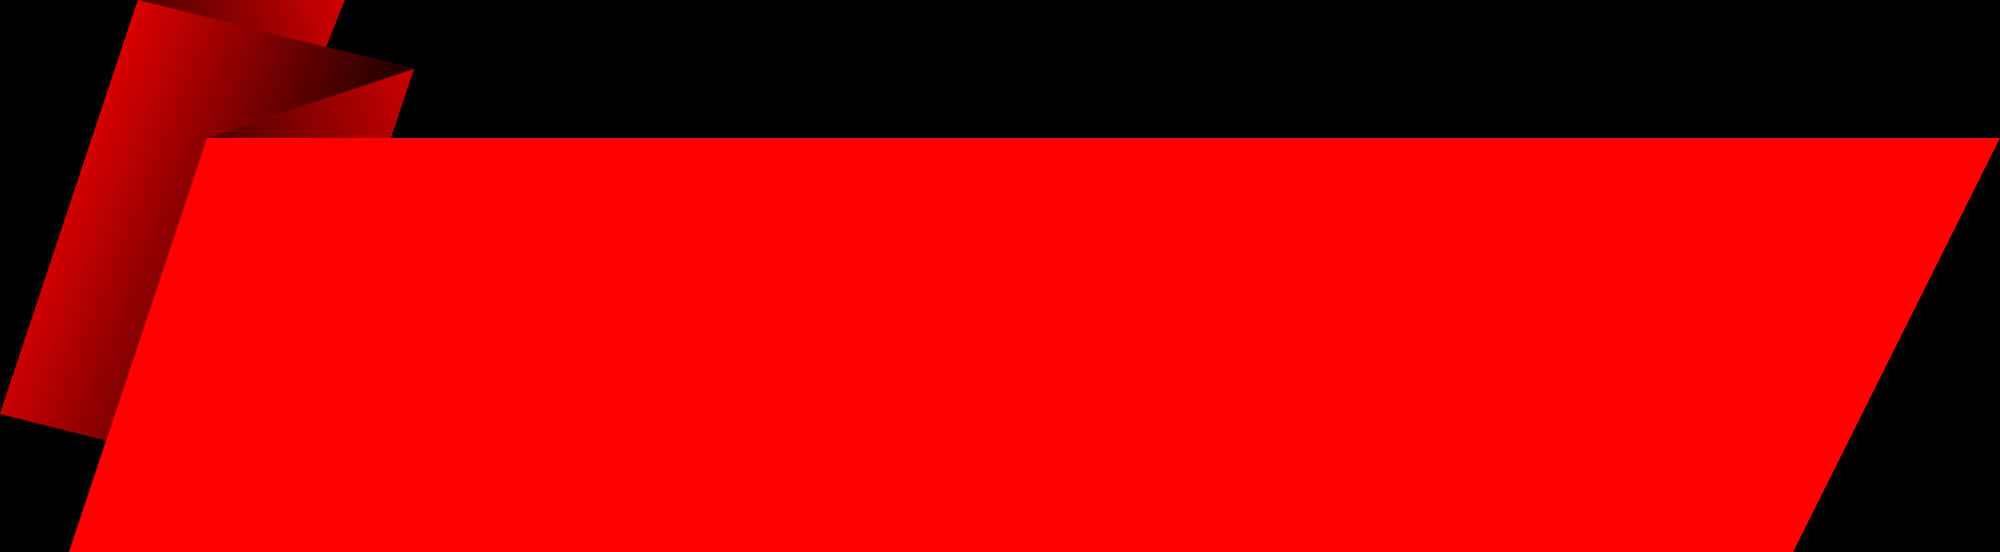 A Red And Black Rectangular Object